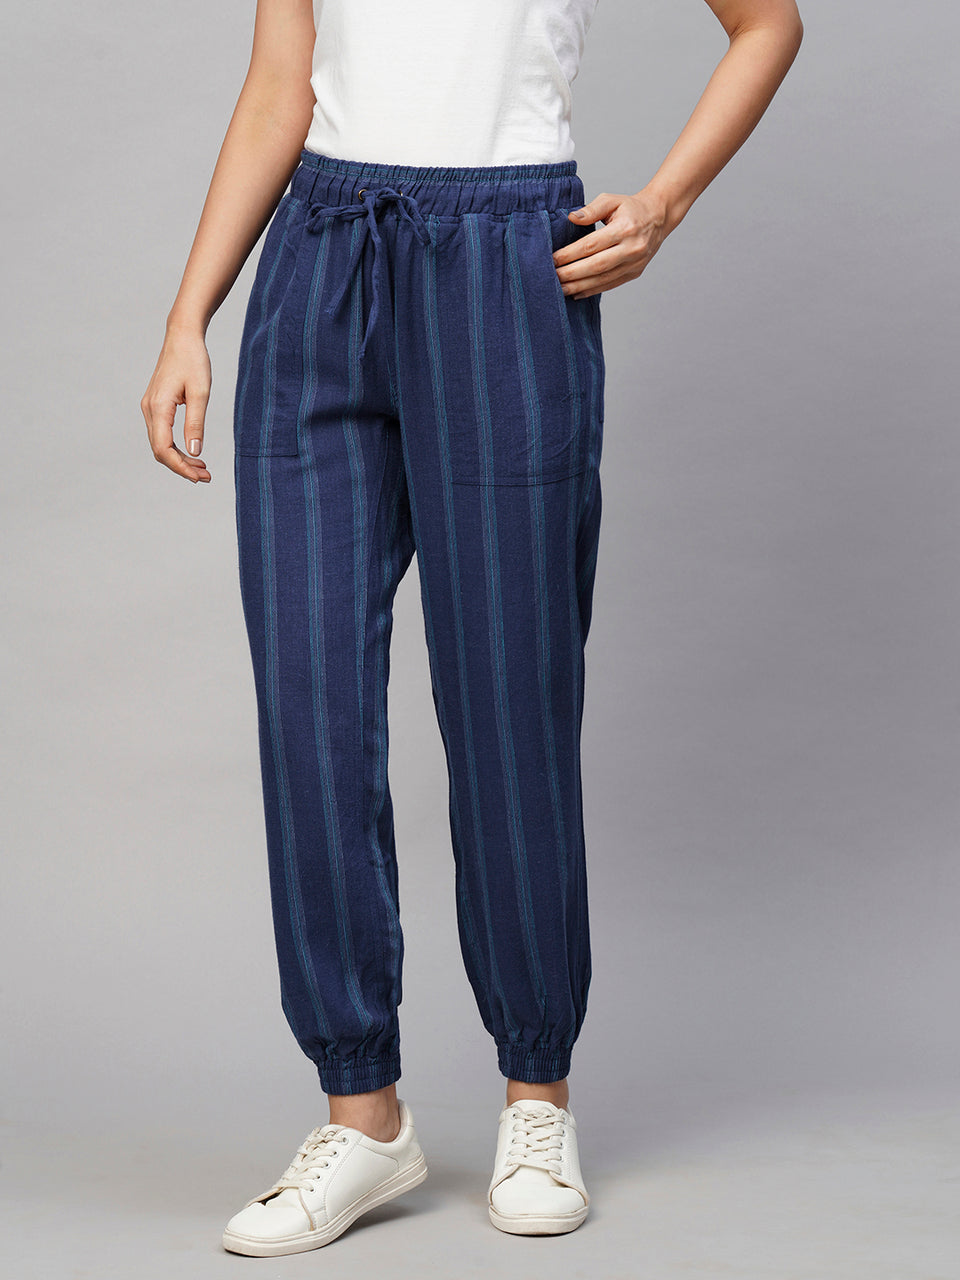 Trousers for Women: Buy Pants for Women Online in India | Cottonworld